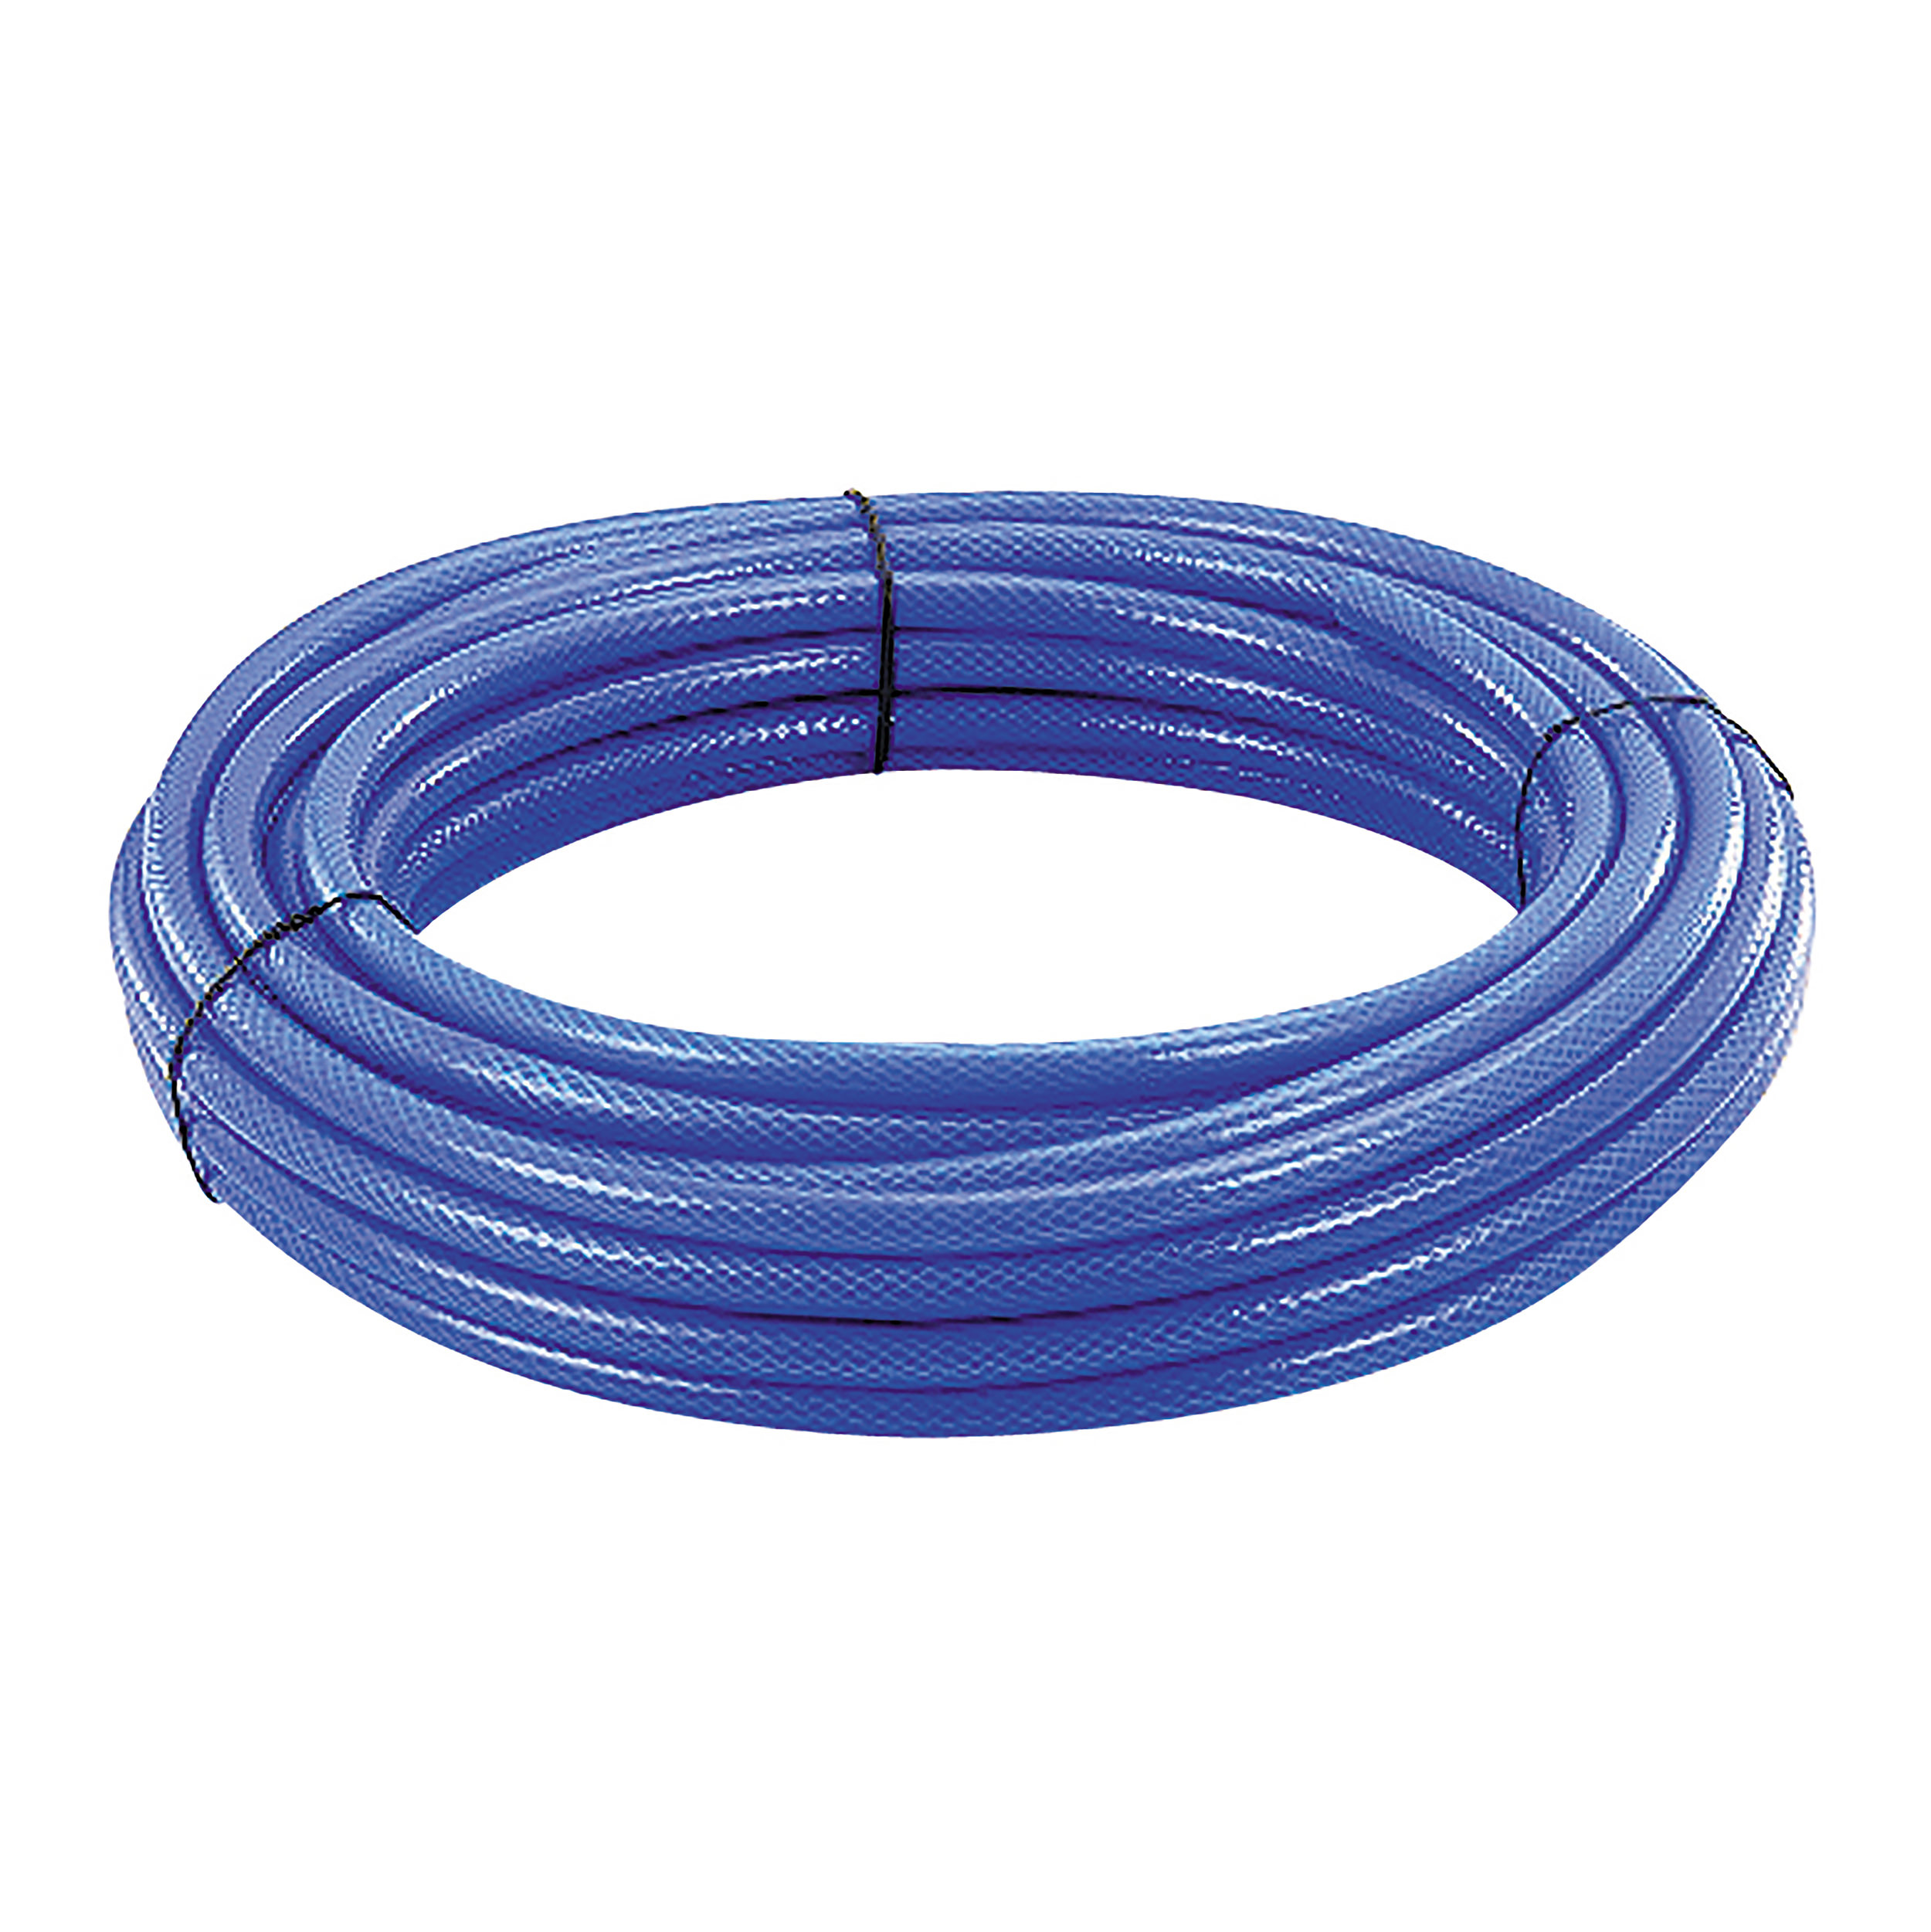 PU compressed air hose, without connectors, DN × s (mm): Ø9.5 × 2 mm, pressure at 20 °C: 198.7 psi, MOP: 203 psi, length: 50 m